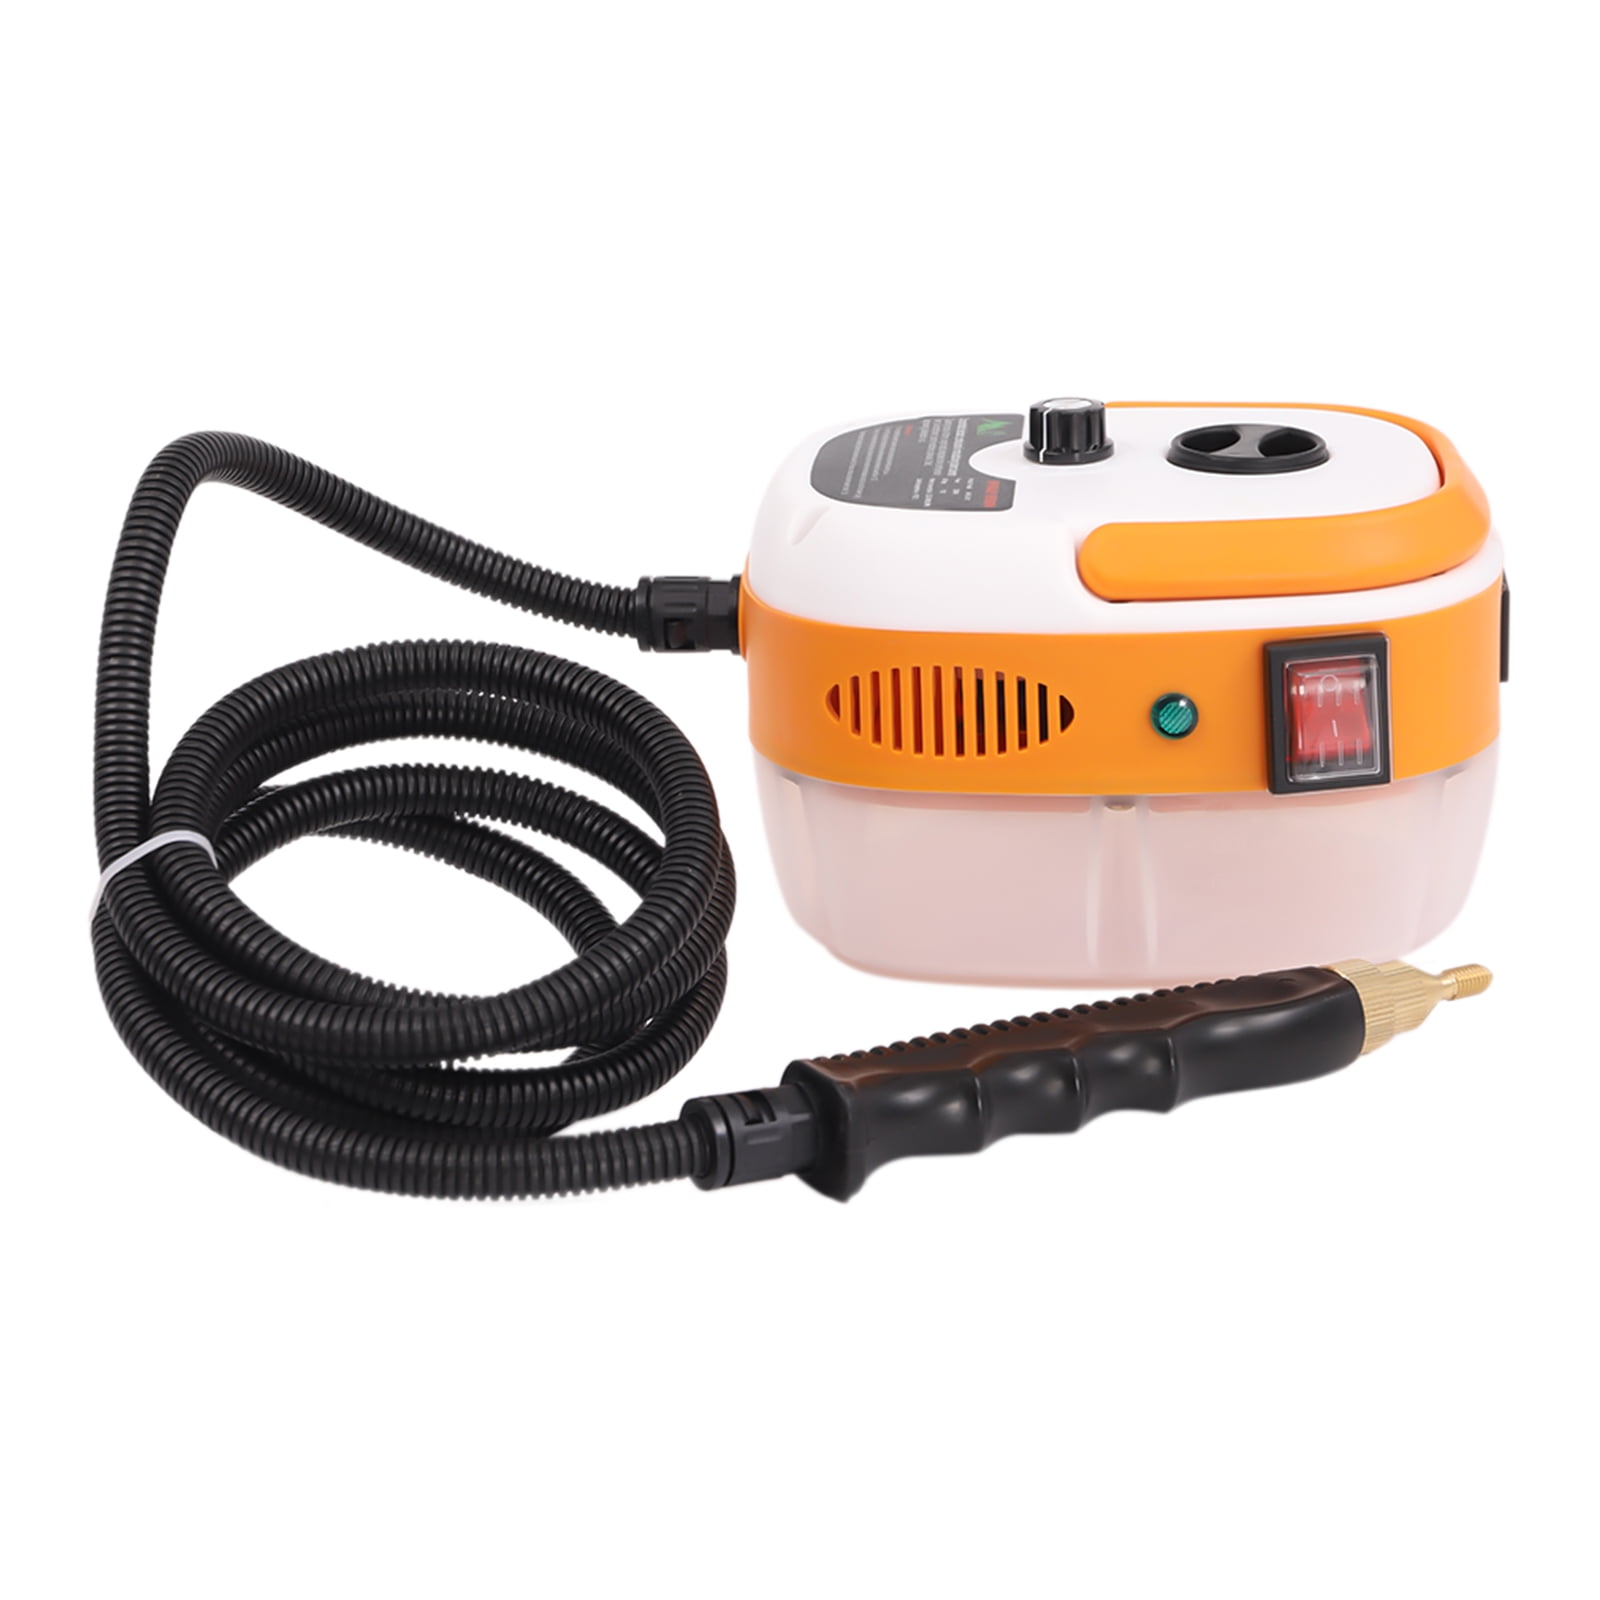 Portable Grout Tile Steam Cleaner Handhold Pressure Steam Cleaning Machine  1500W